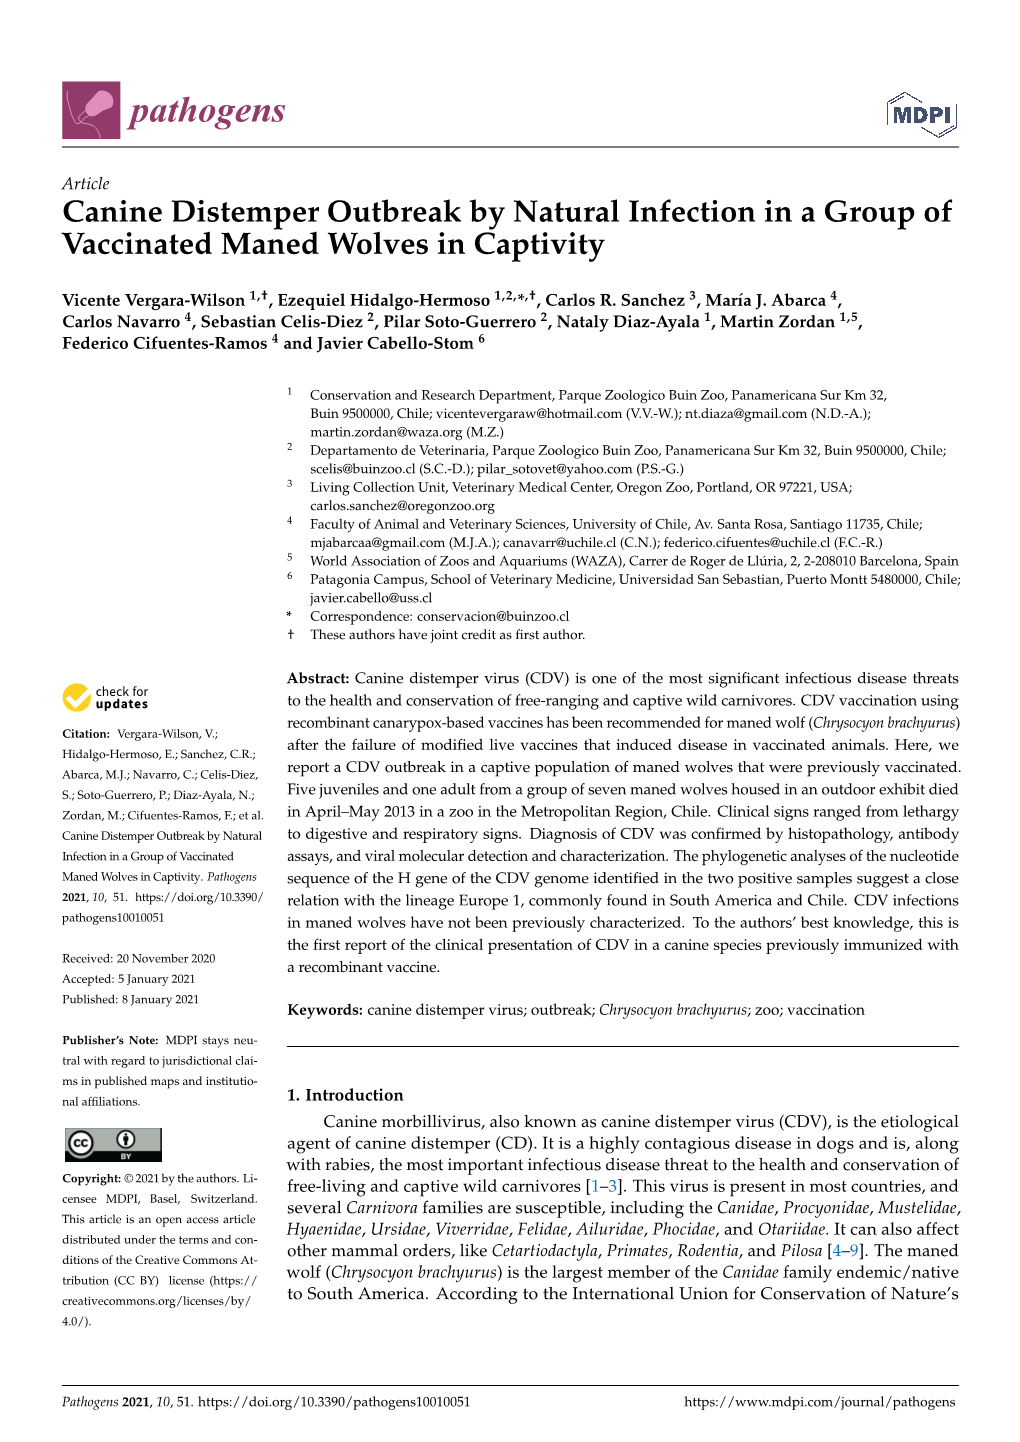 Canine Distemper Outbreak by Natural Infection in a Group of Vaccinated Maned Wolves in Captivity